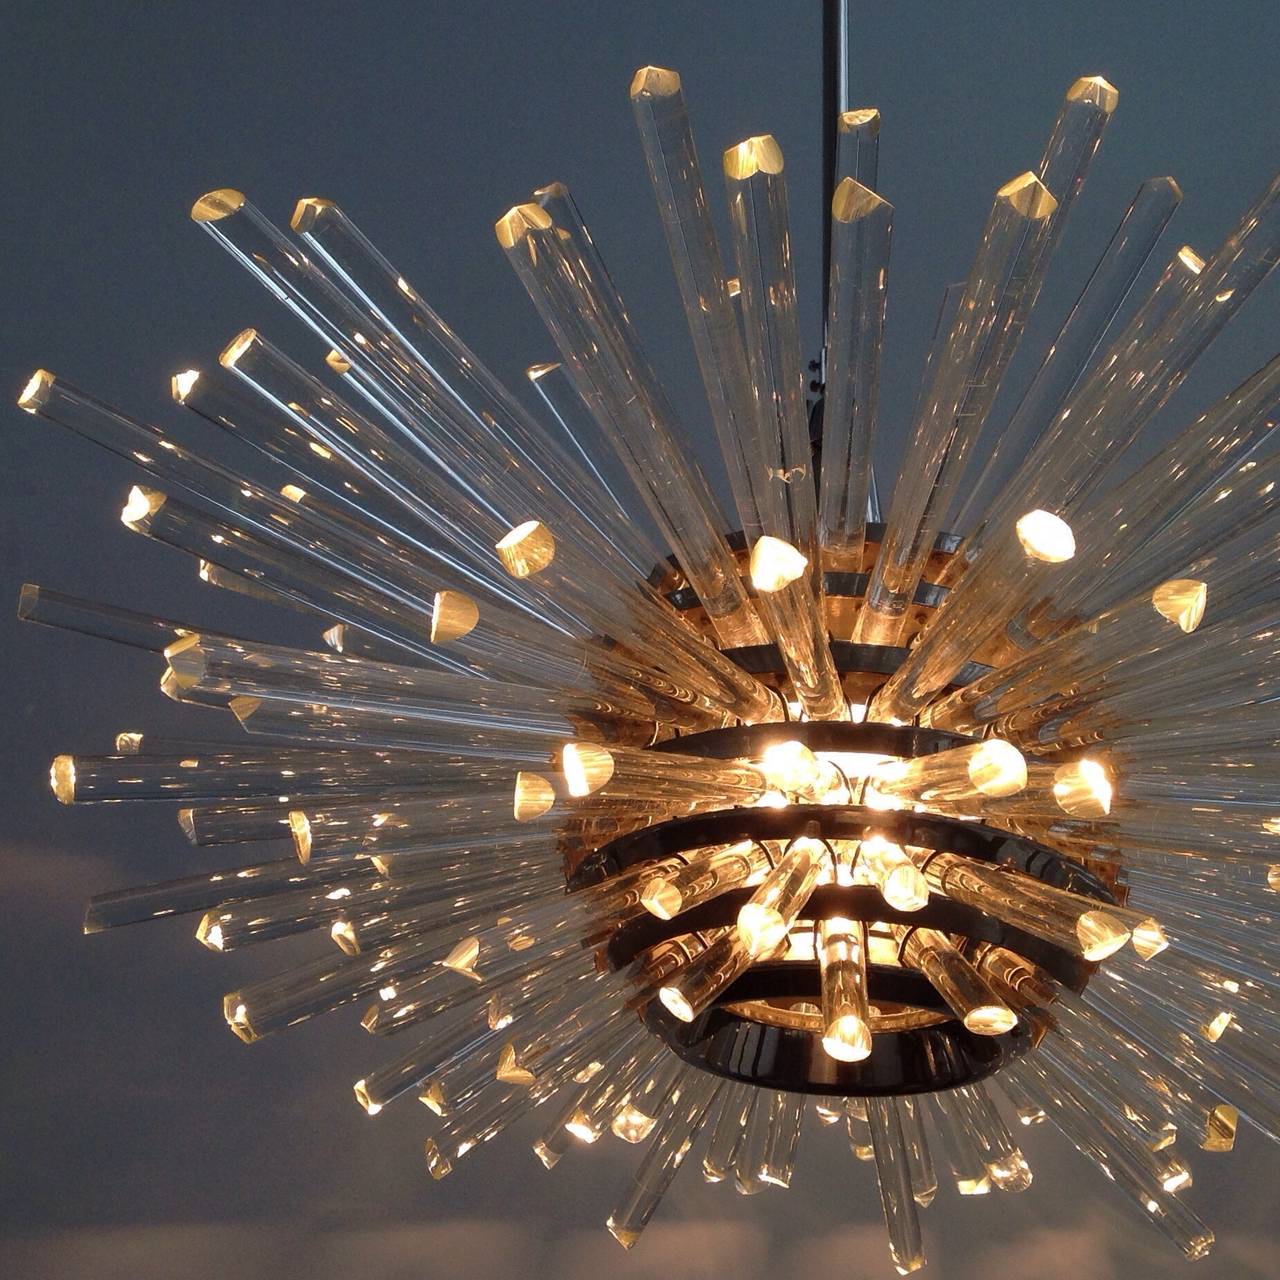 Beautiful Austrian radiant Mid-Century "Miracle" chandelier, designed by Prof. Friedl Bakalowits, made by his company Bakalowits & Sons, Vienna, Austria in the 1960s. Nickel-plated version, with clear crystal glass rods. Stunning